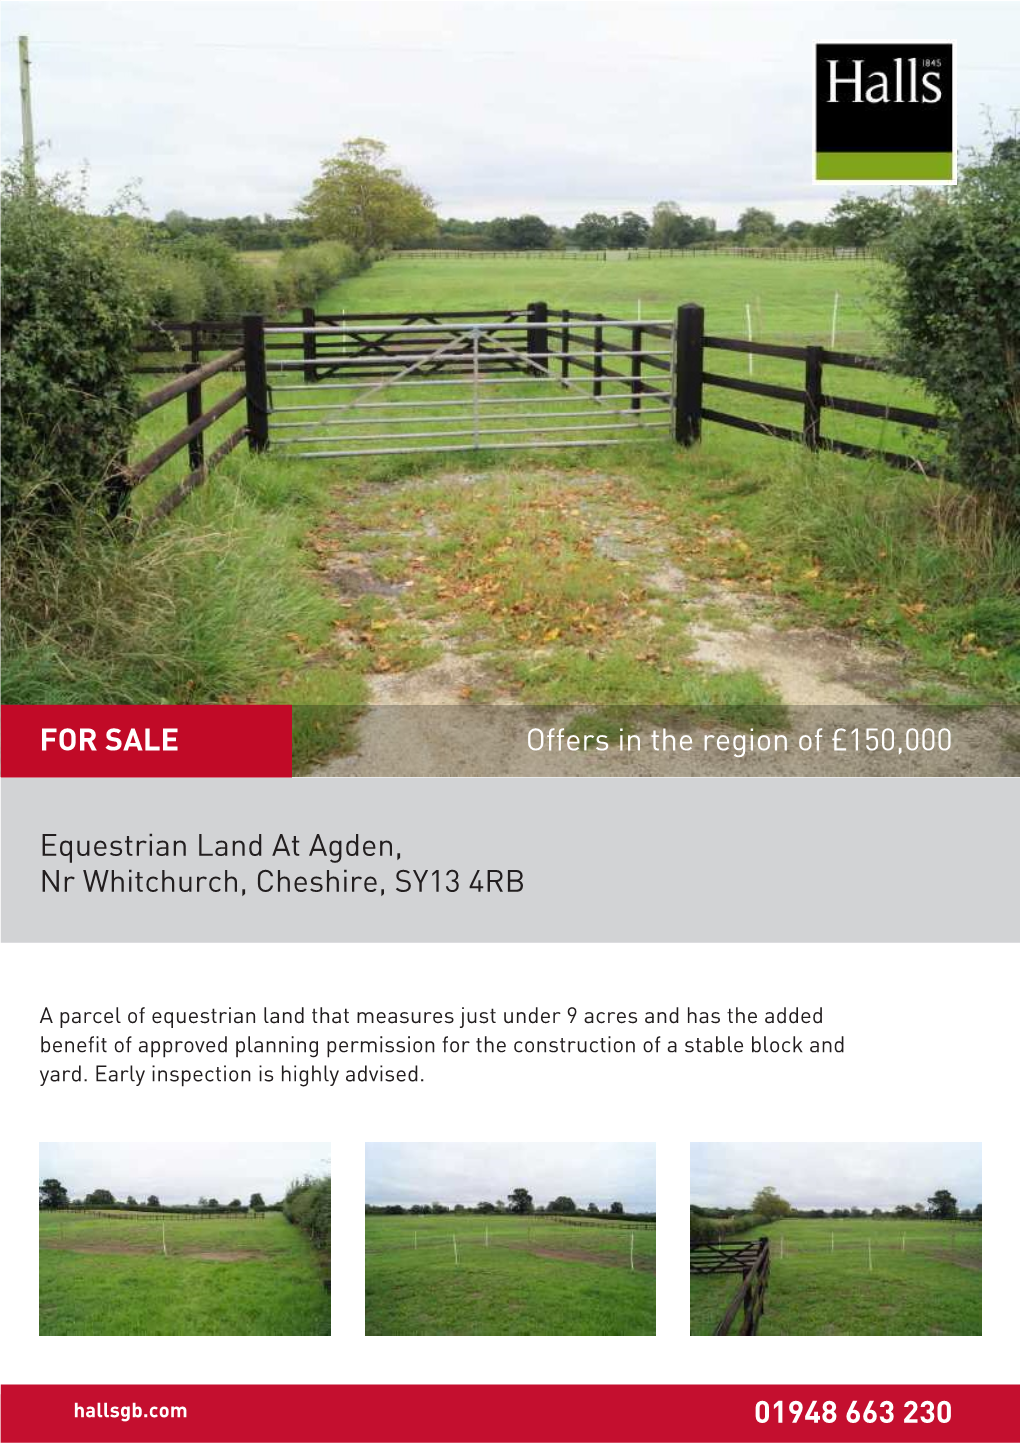 Equestrian Land at Agden, Nr Whitchurch, Cheshire, SY13 4RB